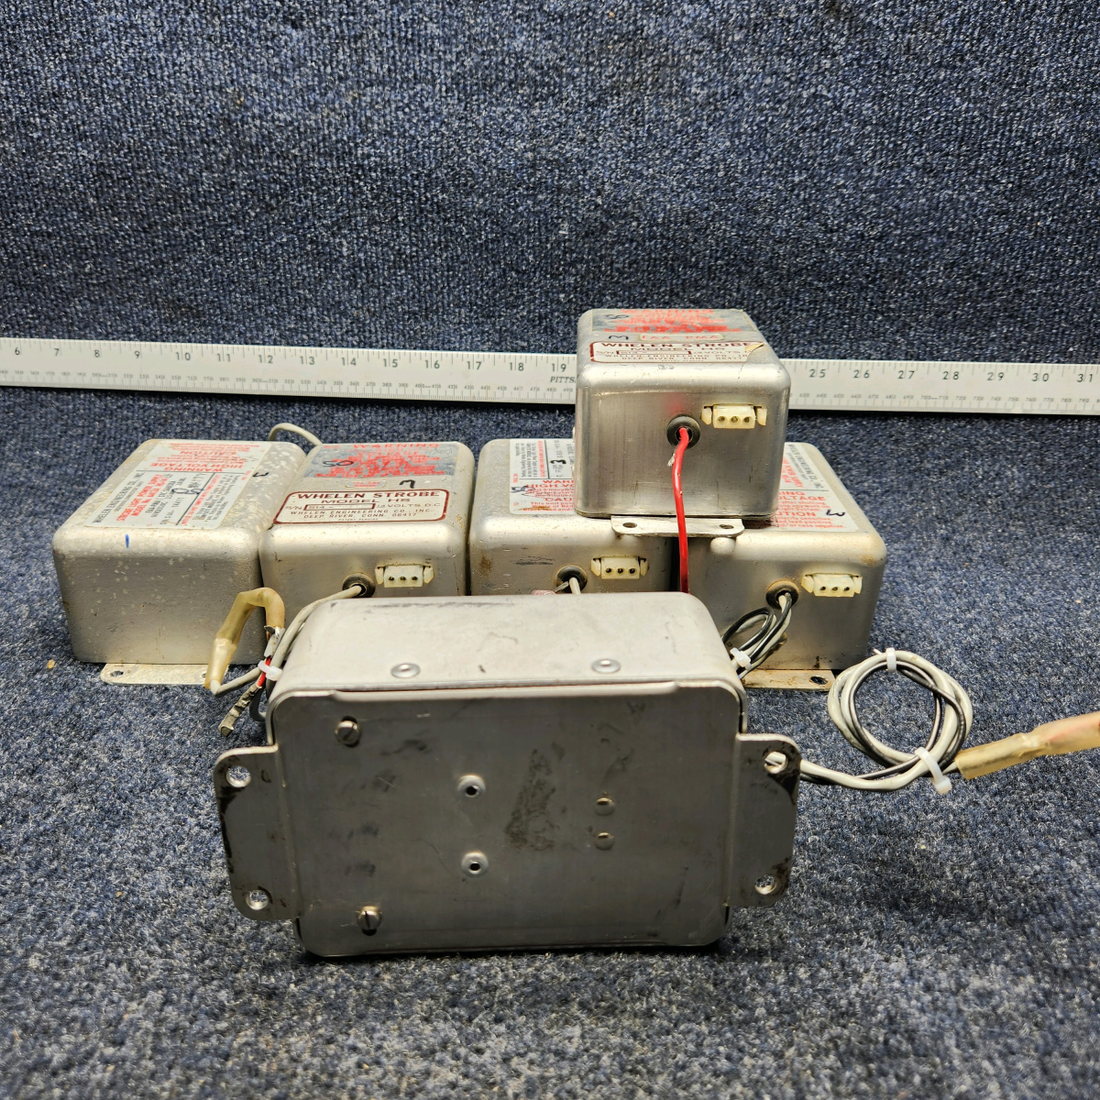 Used aircraft parts for sale, A412A. HS-14 Whelen Strobe Power Supply WHELEN STROBE LIGHT POWER SUPPLY "FOR PARTS ONLY" 14VOLTS